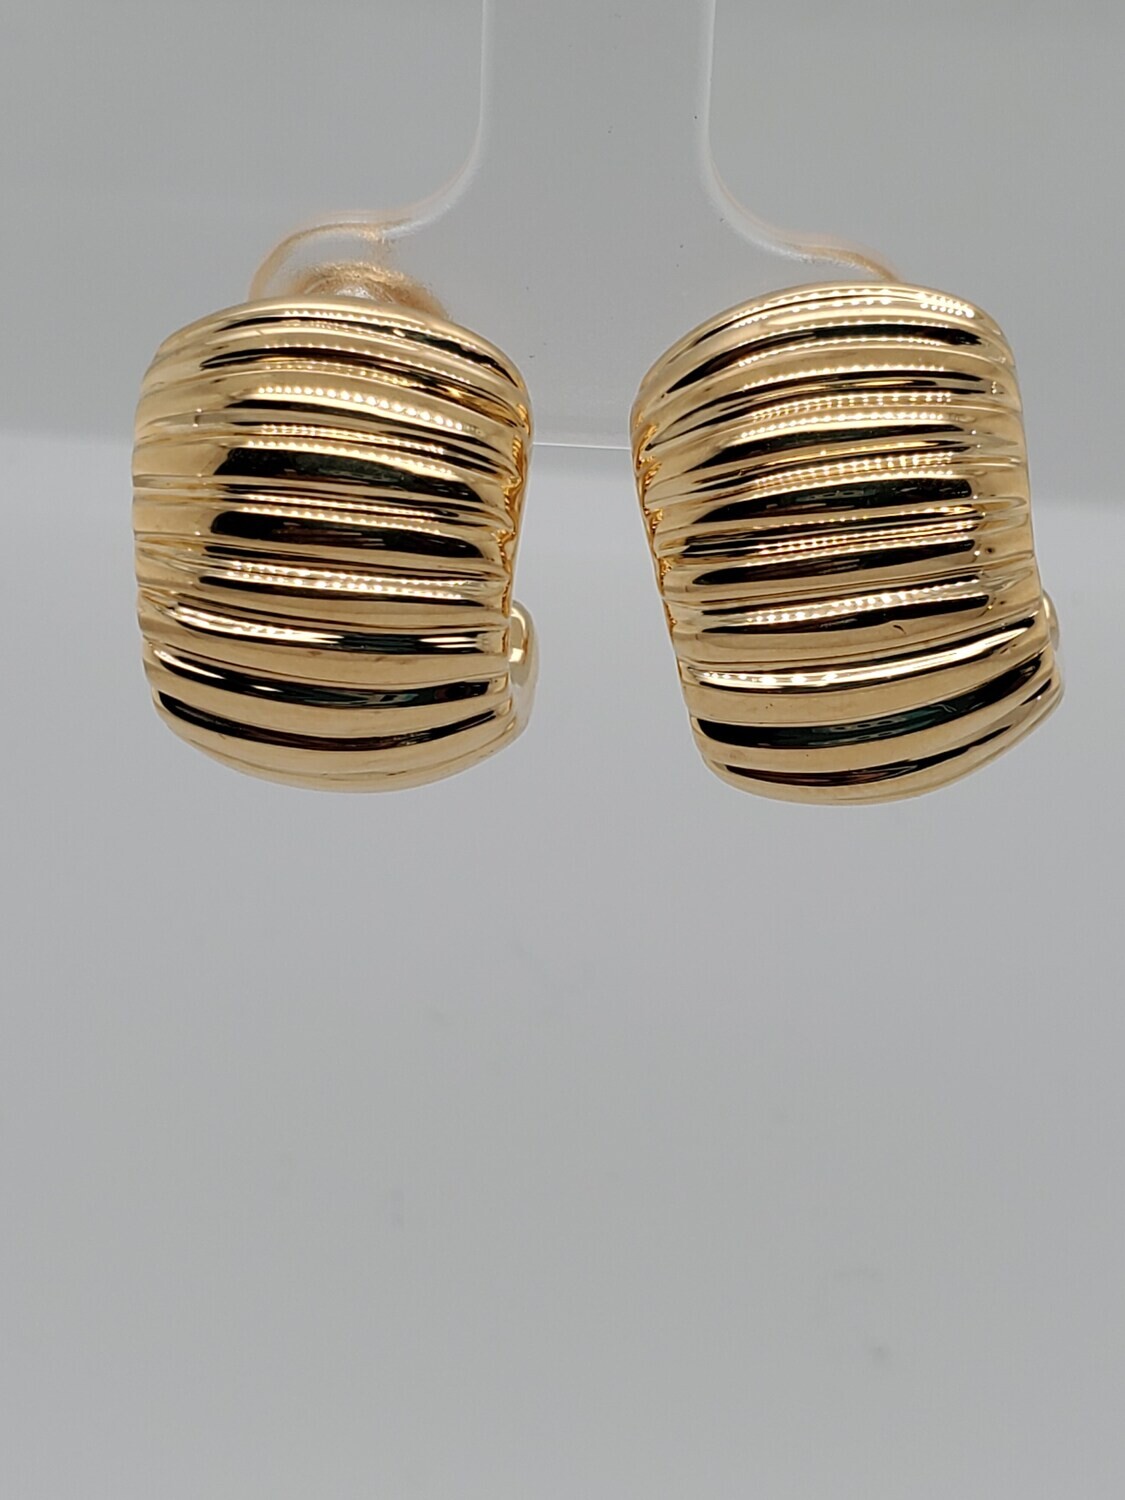 BRAND NEW!! 14kt HOLLOW RIBBED DESIGN THICK HALF HOOP EARRINGS INVENTORY # I-18276 75TH AVE